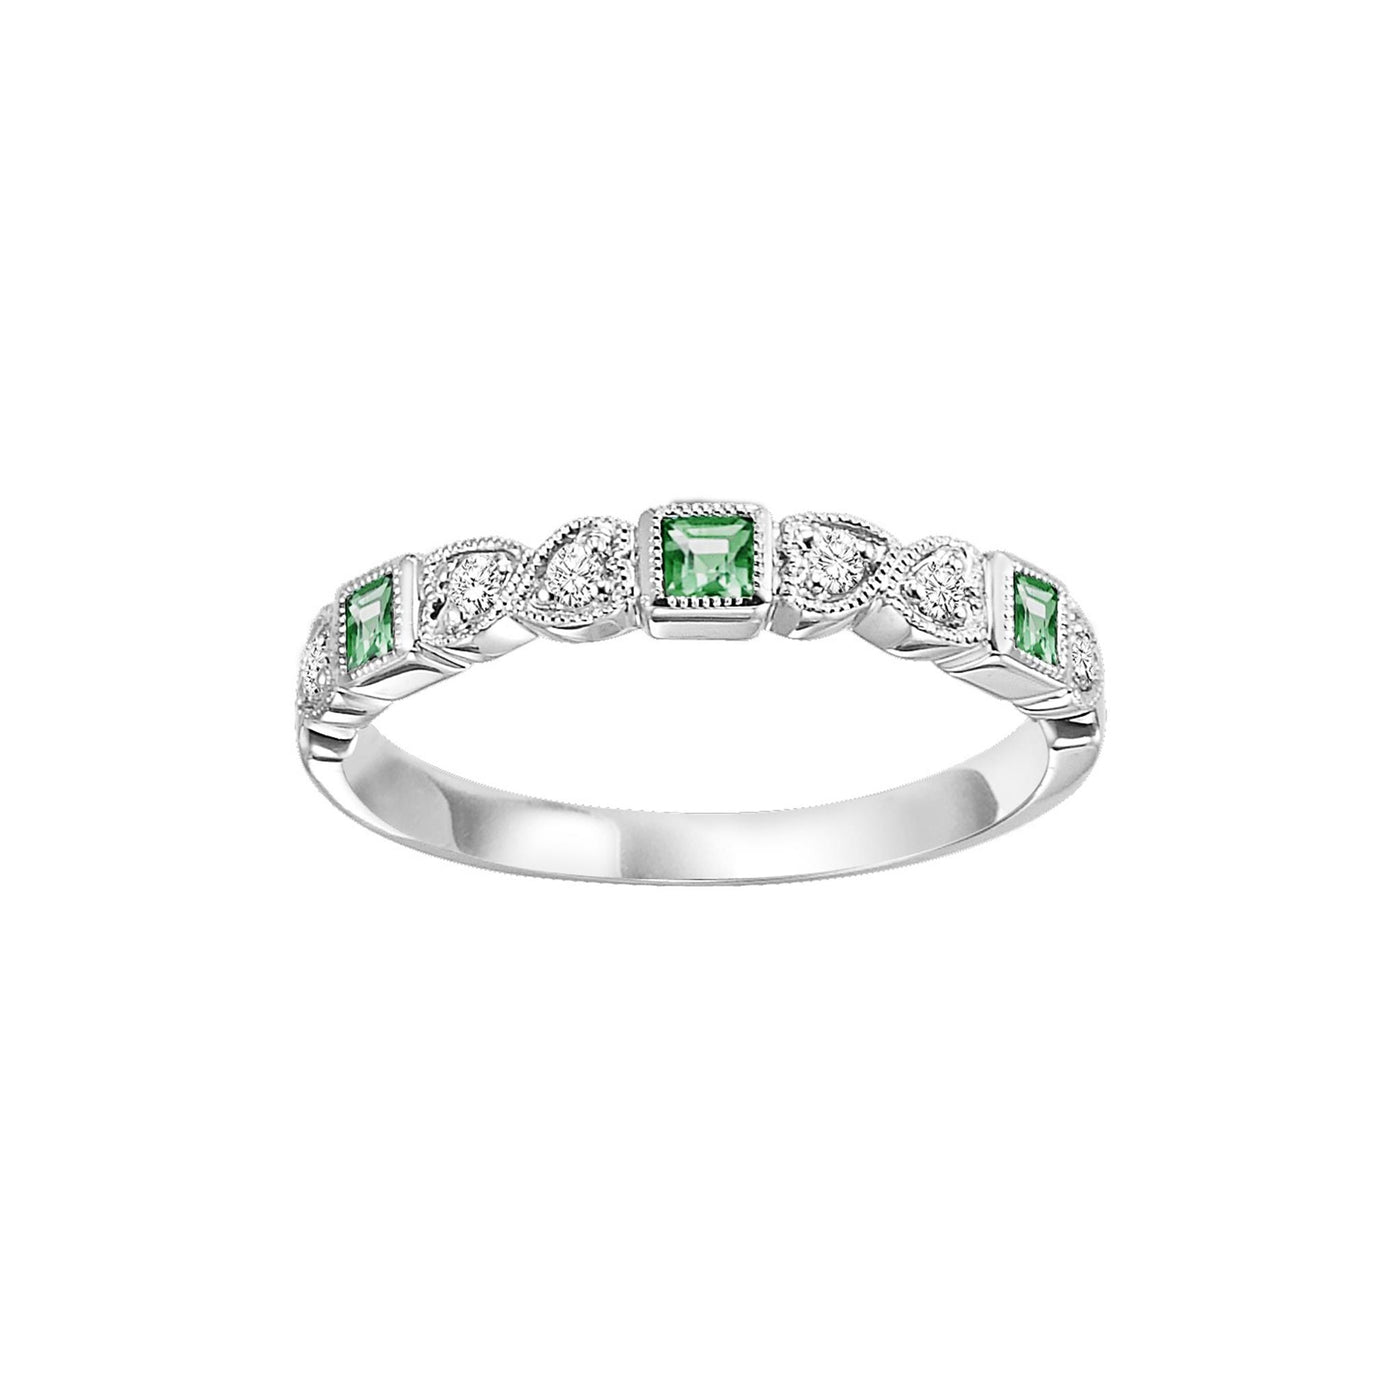 10K White Gold .23ctw Vintage Style Emerald and Diamond Ring